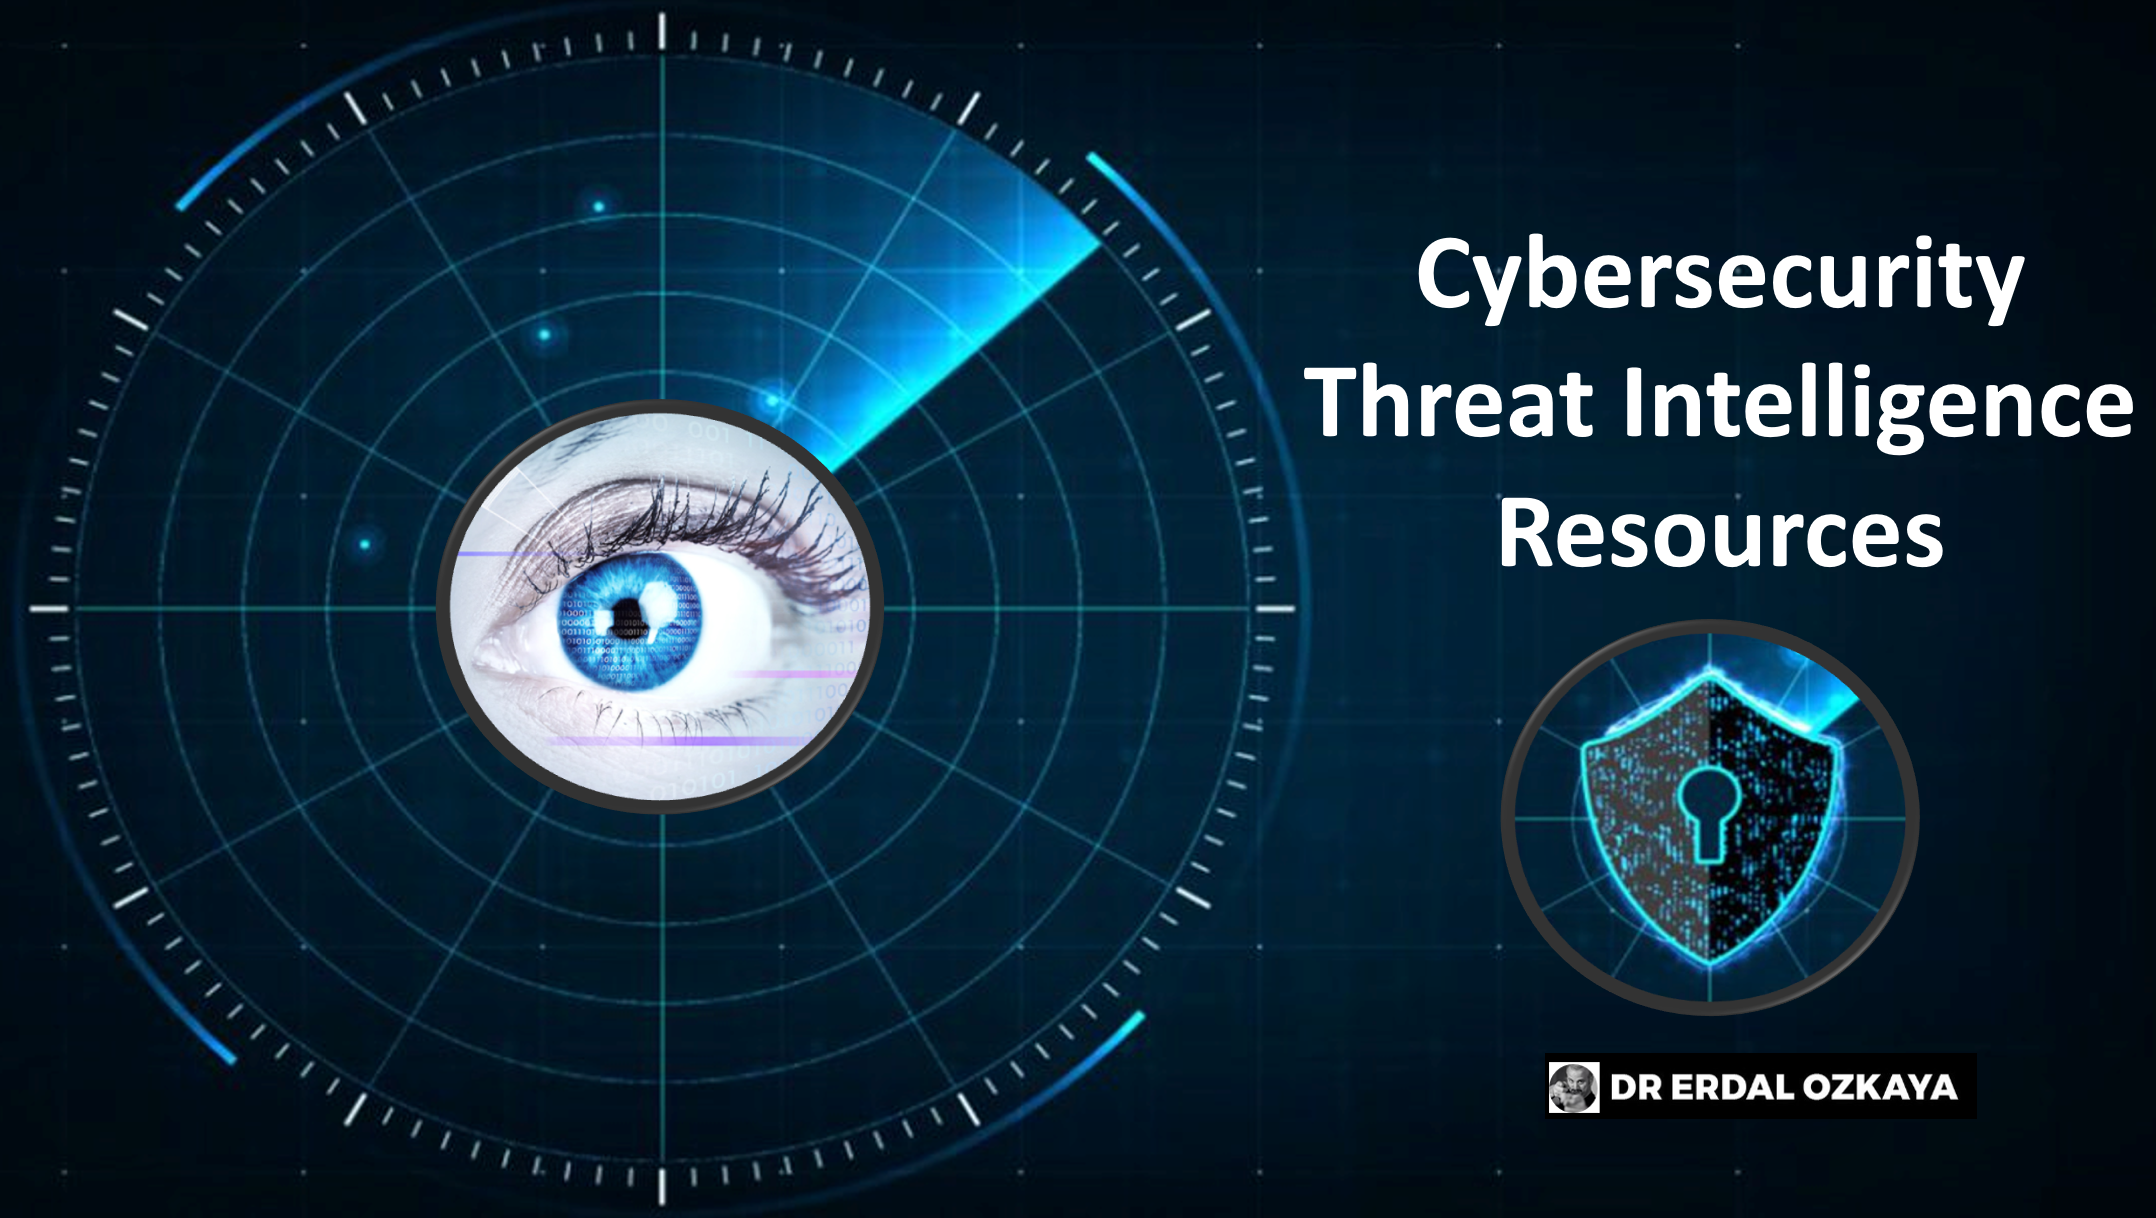 Cyber Threat Intelligence Resources